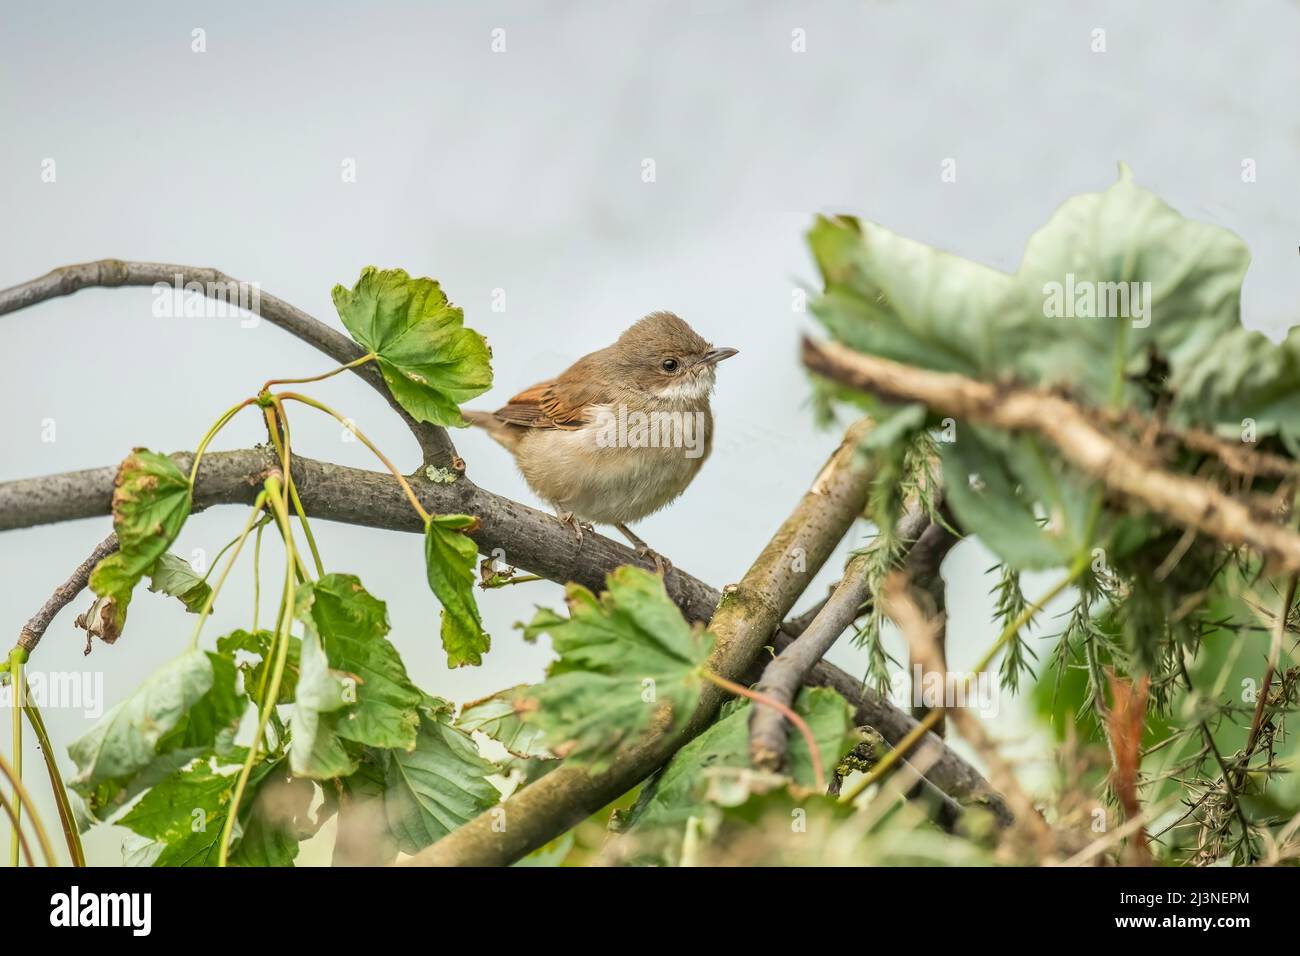 Whitethroat perched on a branch, close up Stock Photo